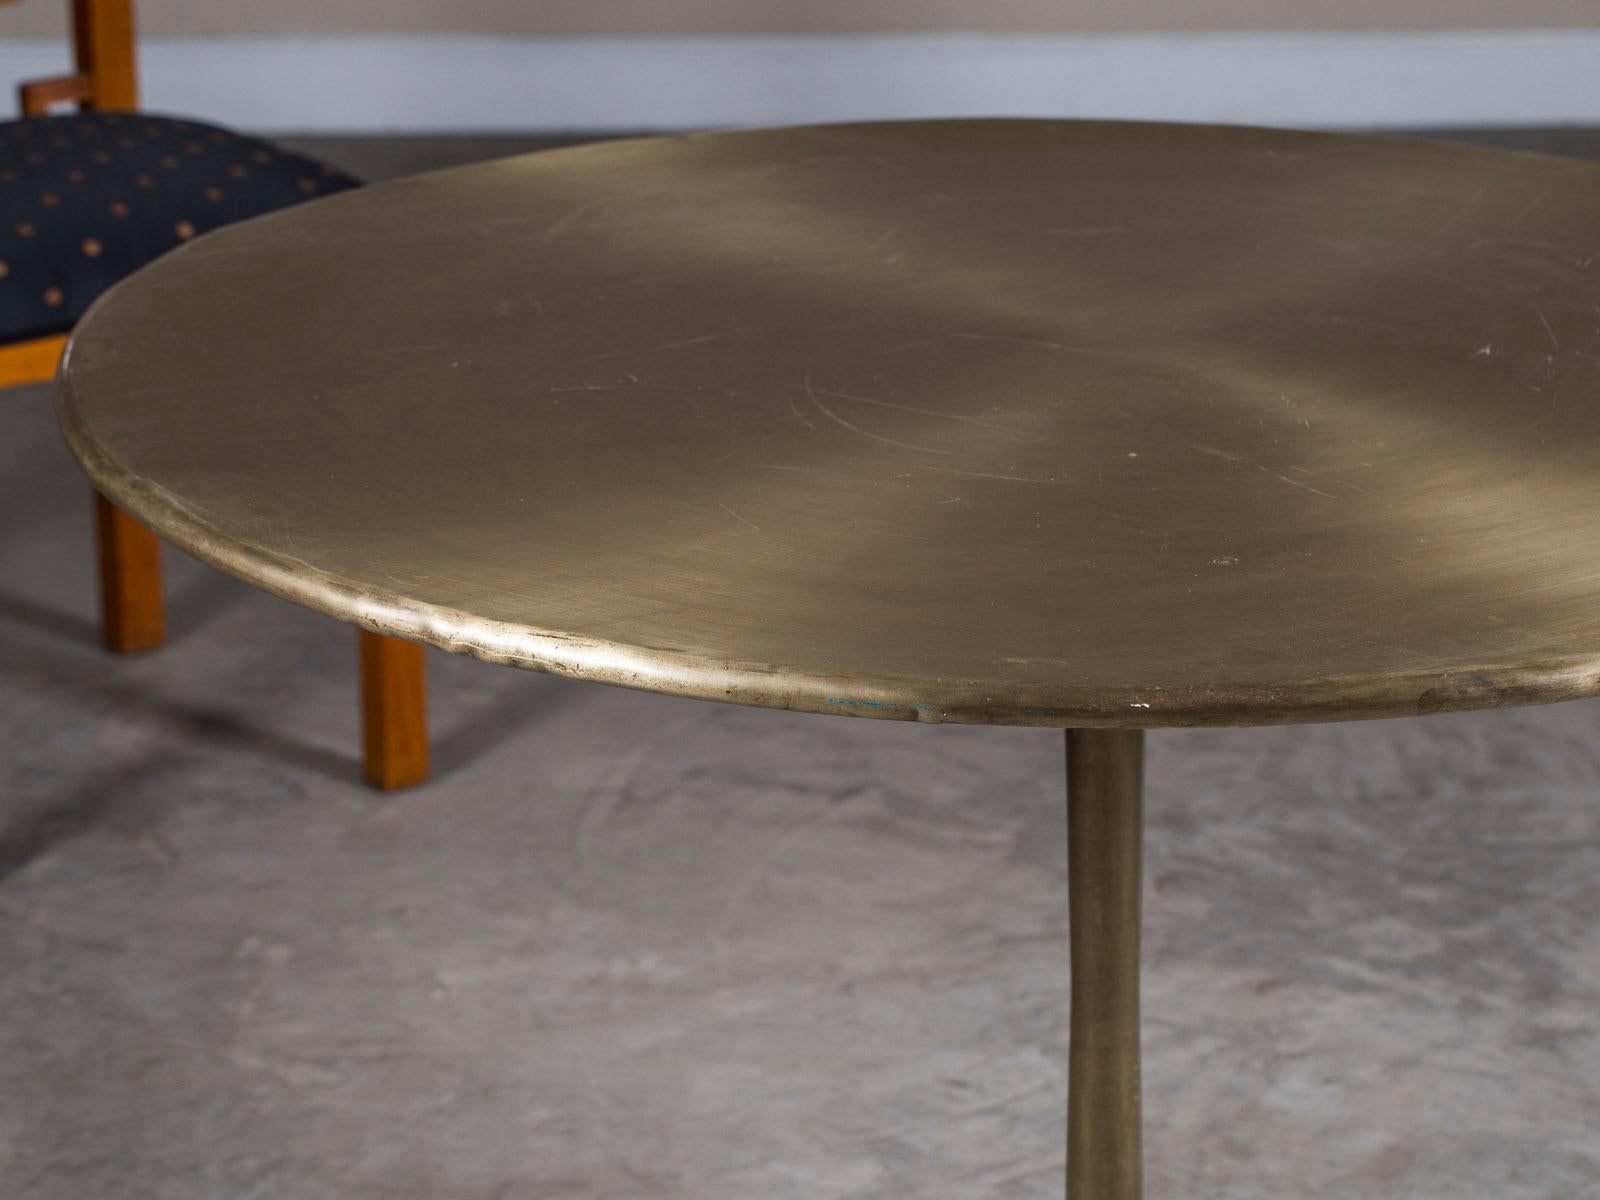 Burnished Saarinen Style Round Brass Dining Table from Holland